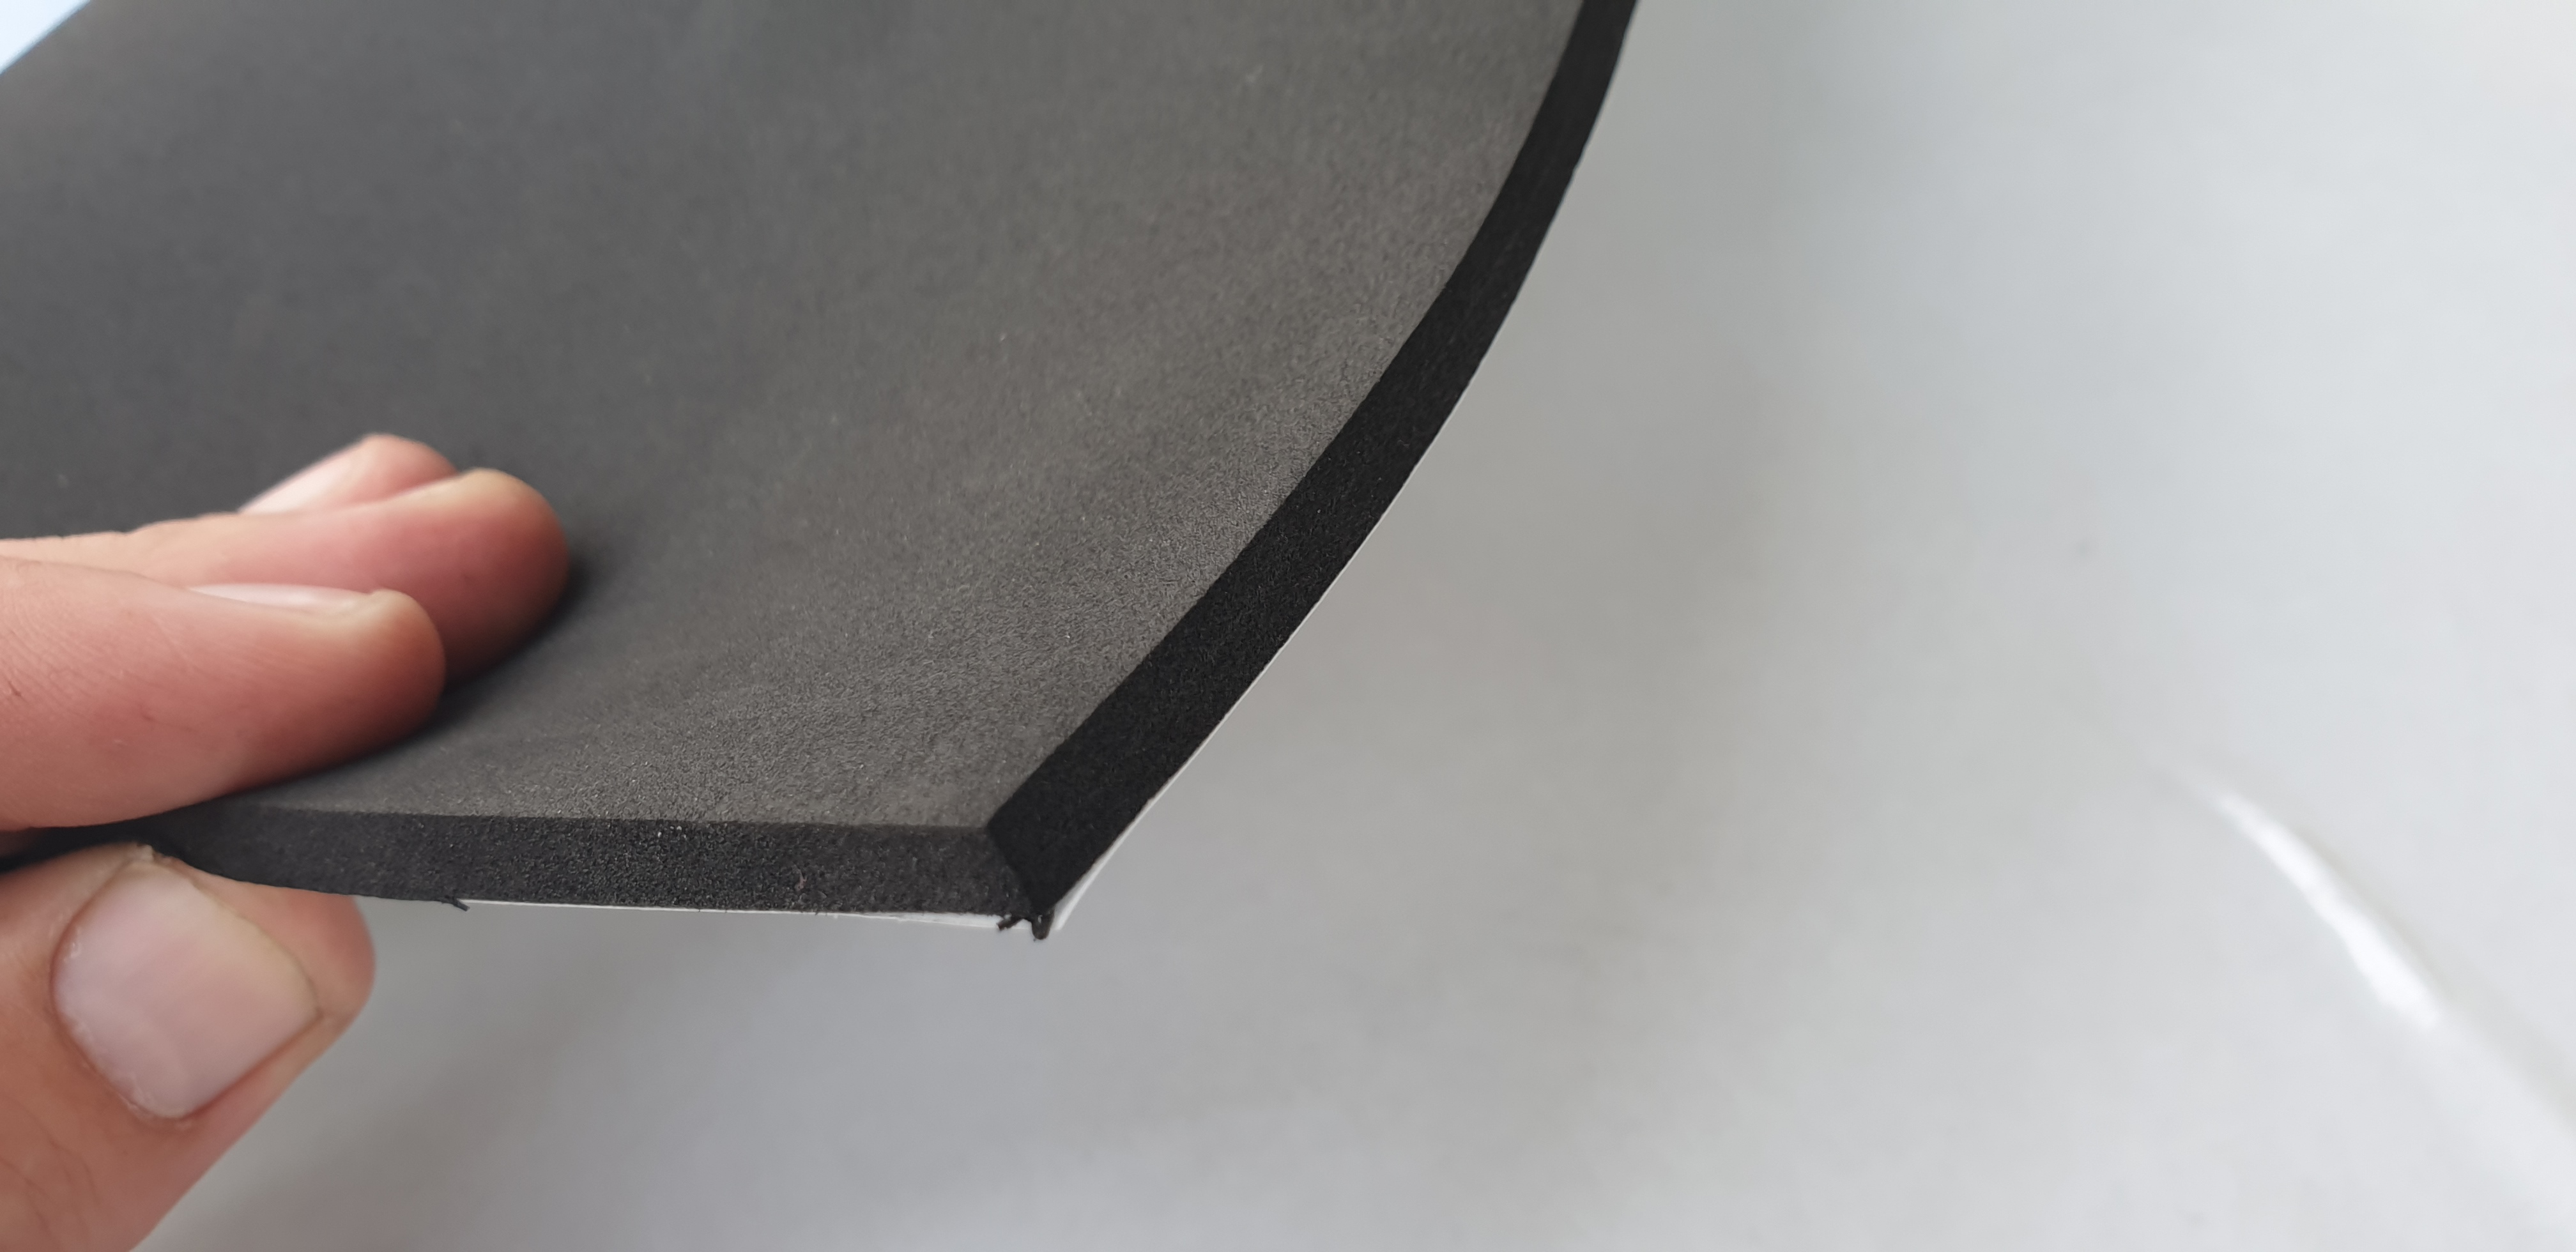 EVA Foam Sheets with Self Adhesive Backing - NZ Rubber and Foam